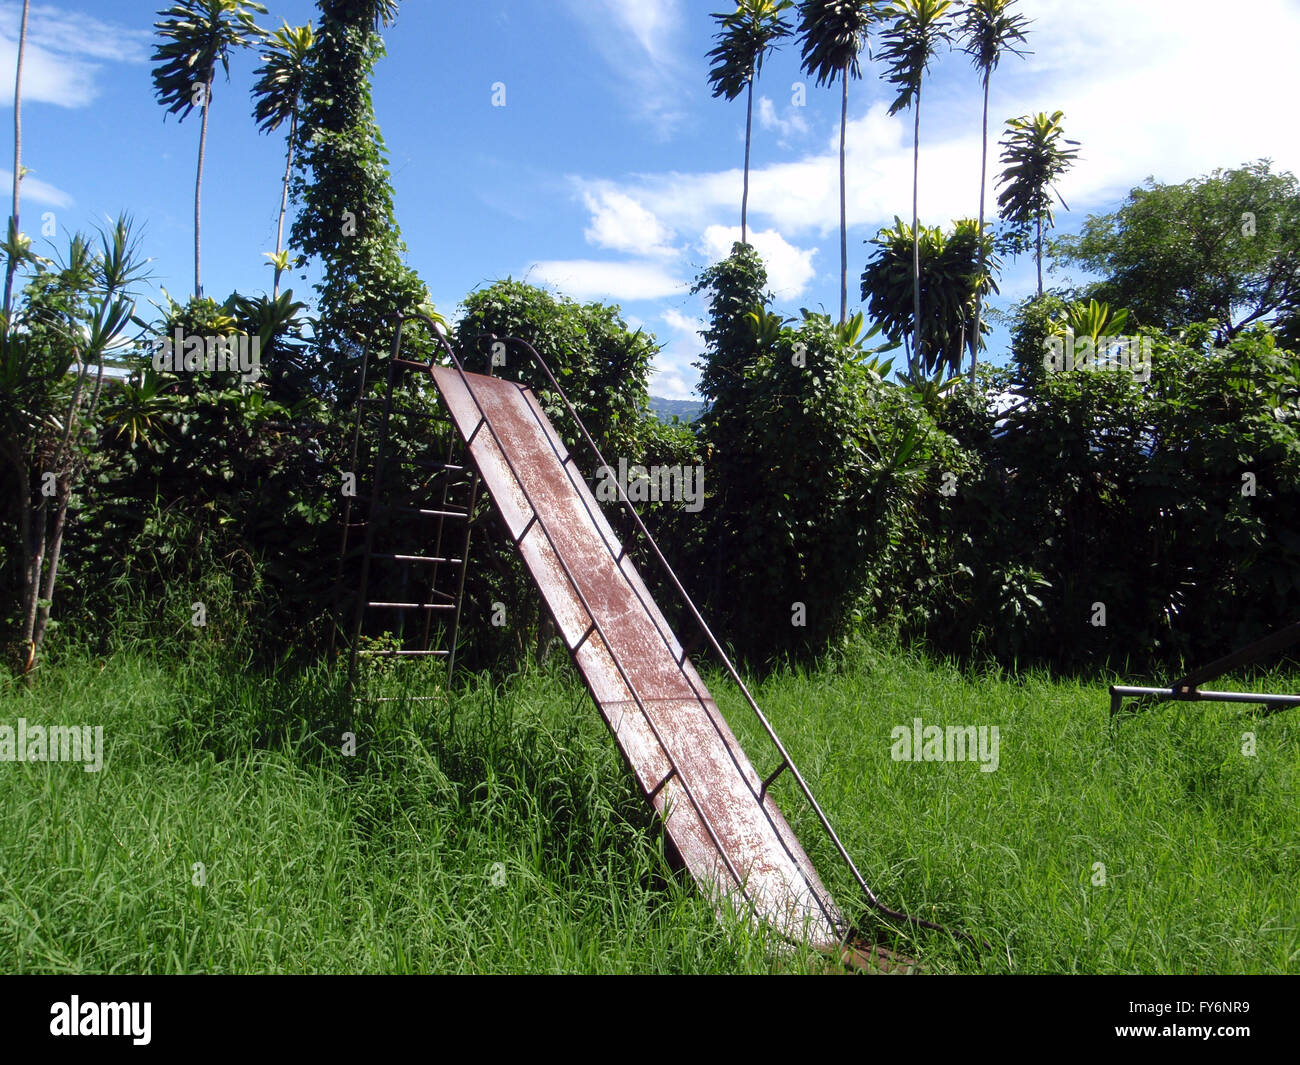 Rusted slide in overgrown grass in Heredia, Costa Rica. Stock Photo